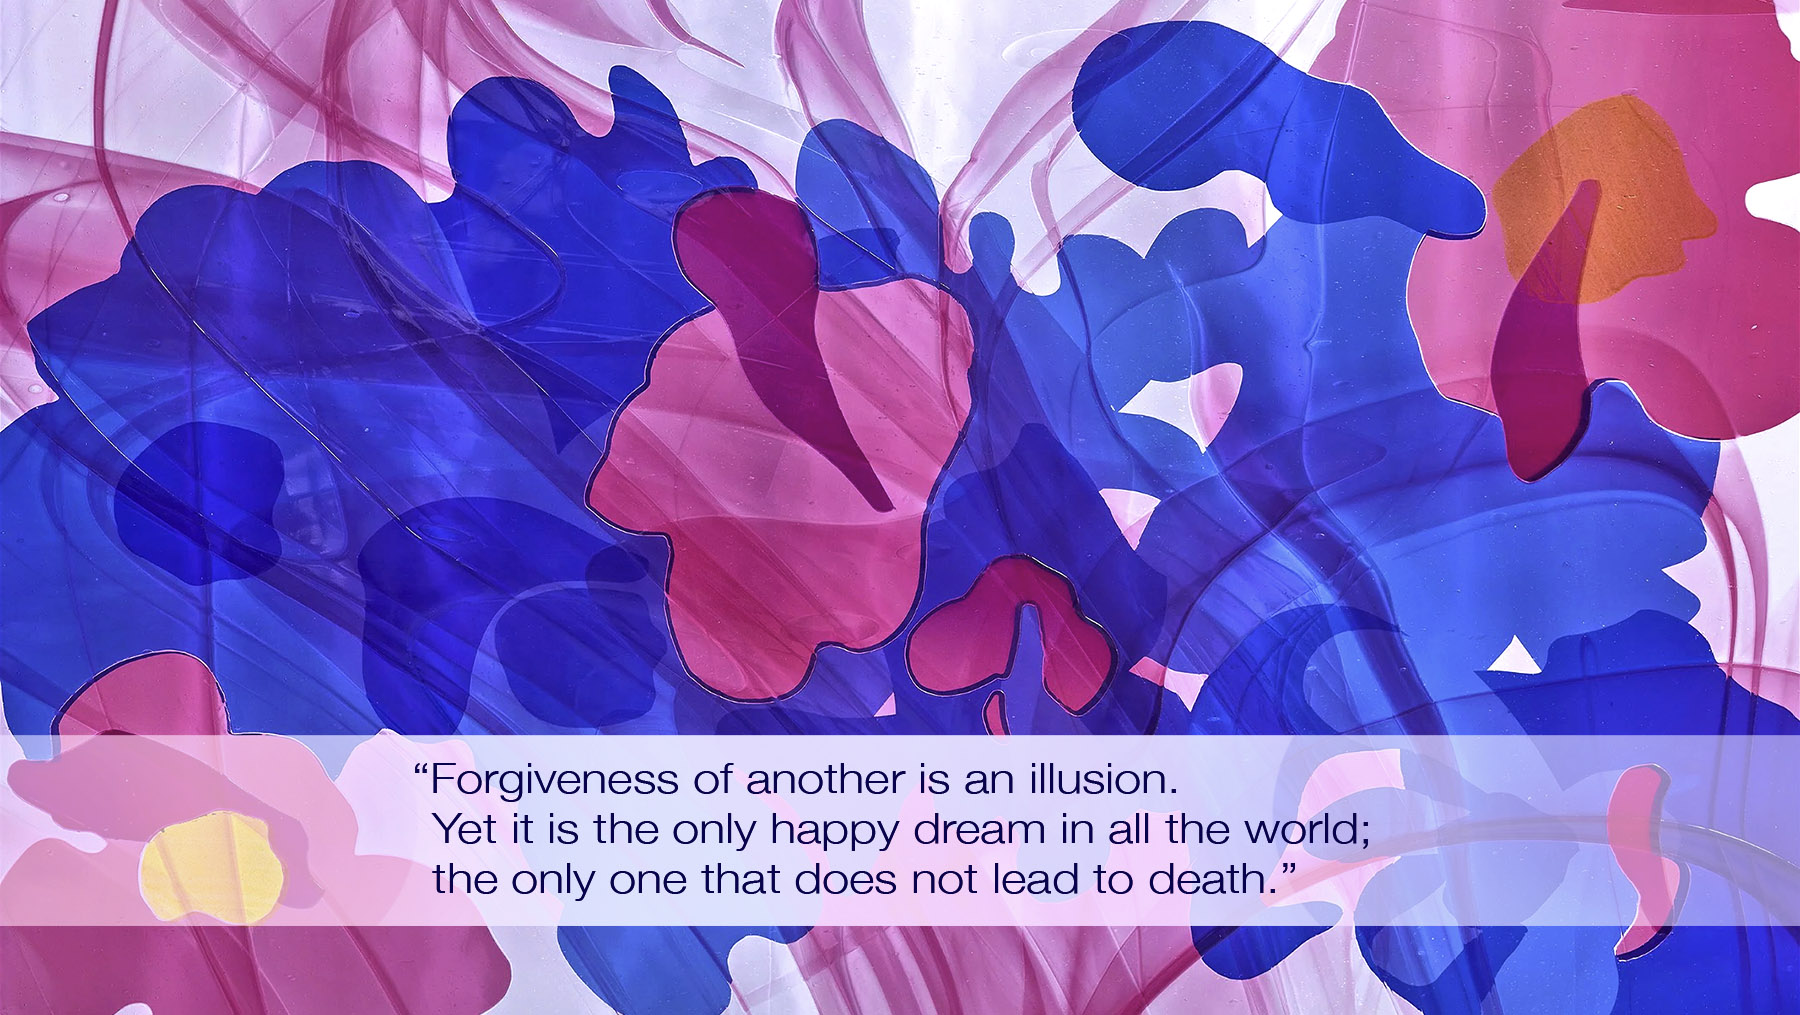 Forgiveness of another is an illusion.  Yet it is the only happy dream in all the world; the only one that does not lead to death.